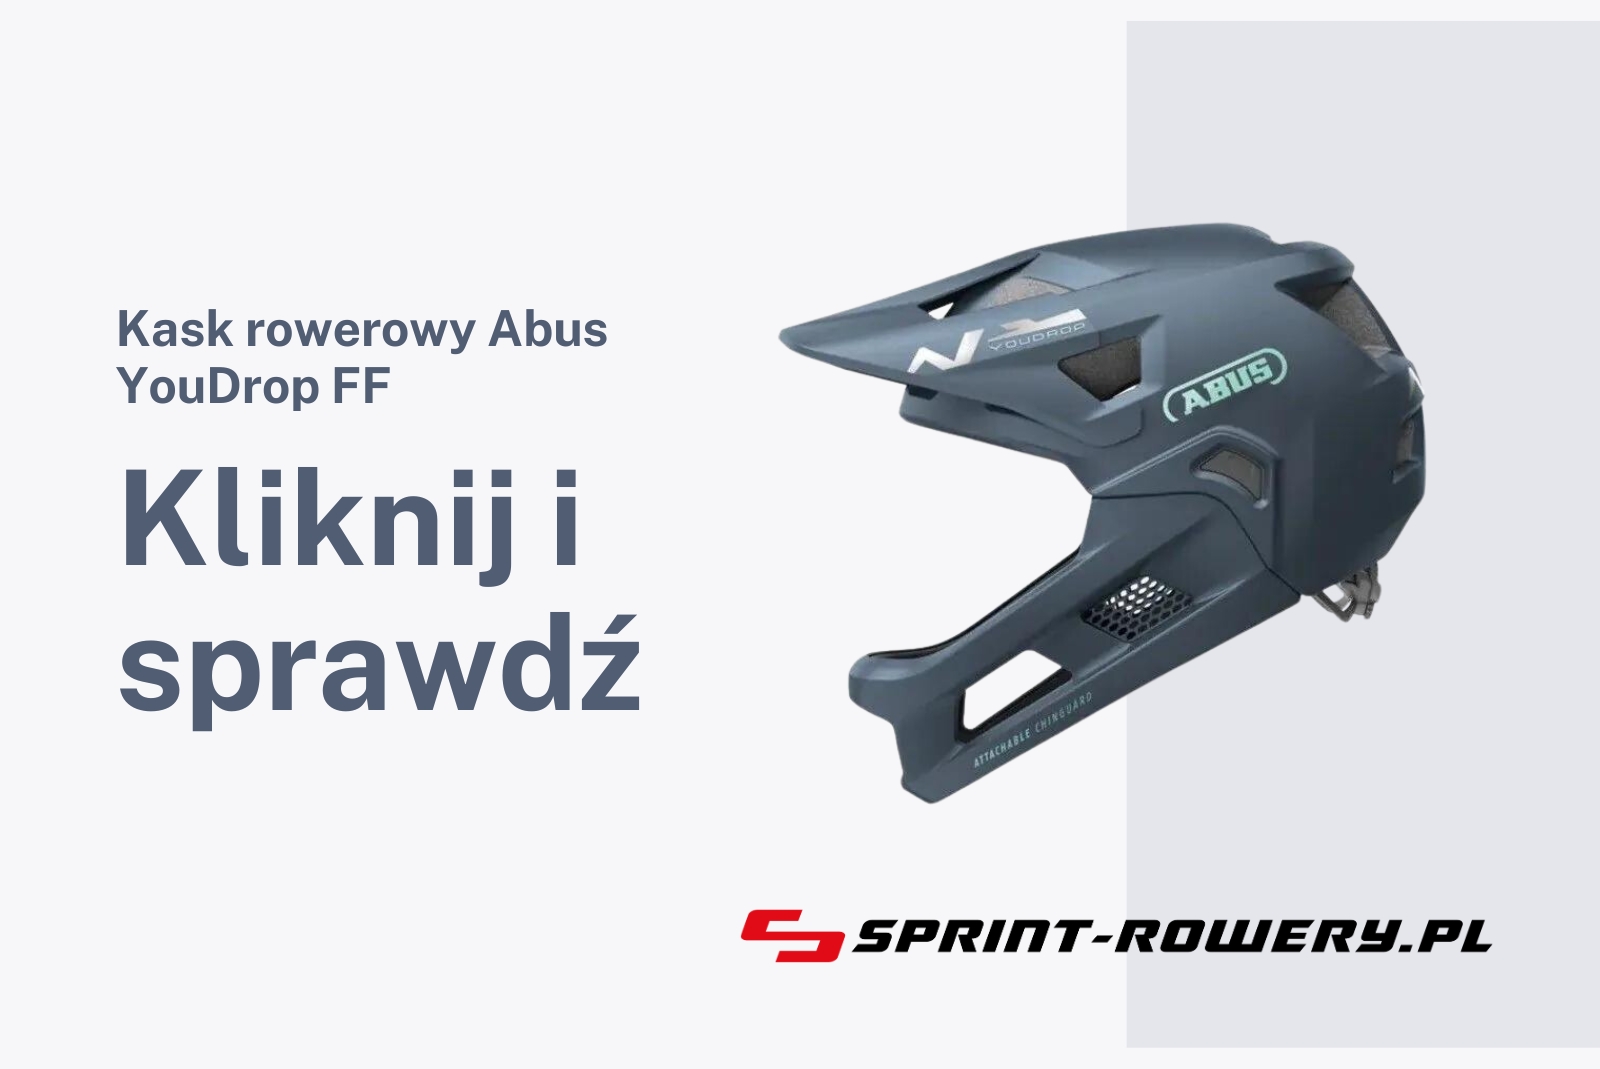 Kask rowerowy Abus YouDrop FF